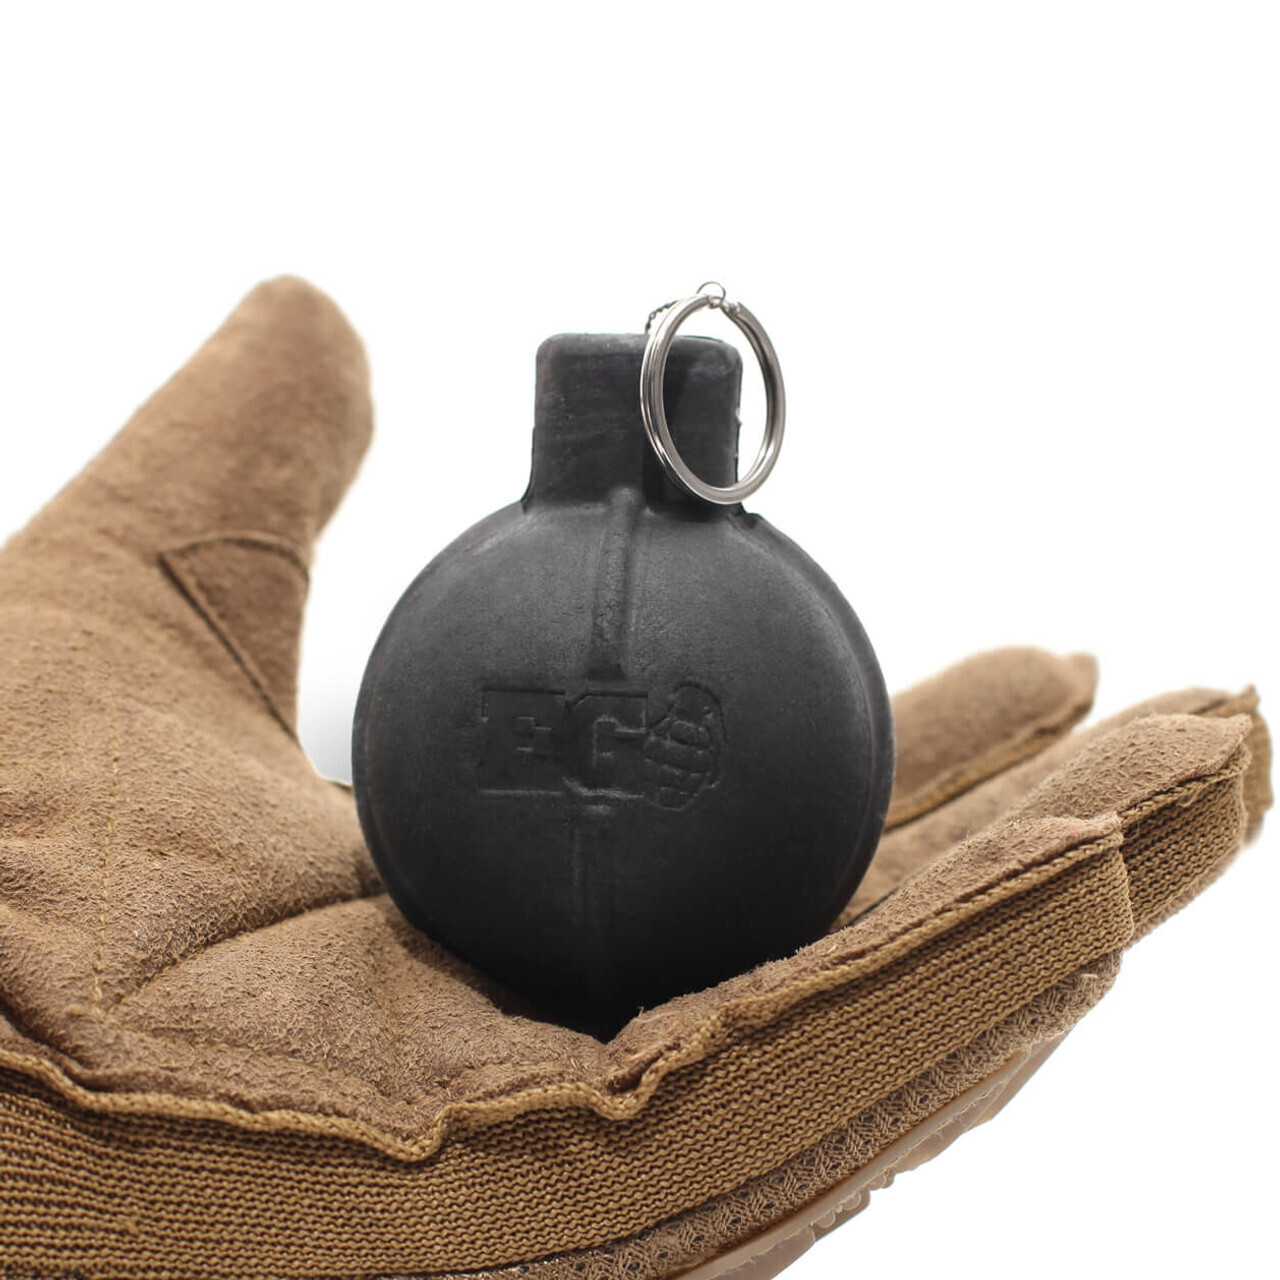 Enola Gaye EG-67 Pyro Grenade (STORE/EVENT PICK-UP ONLY)